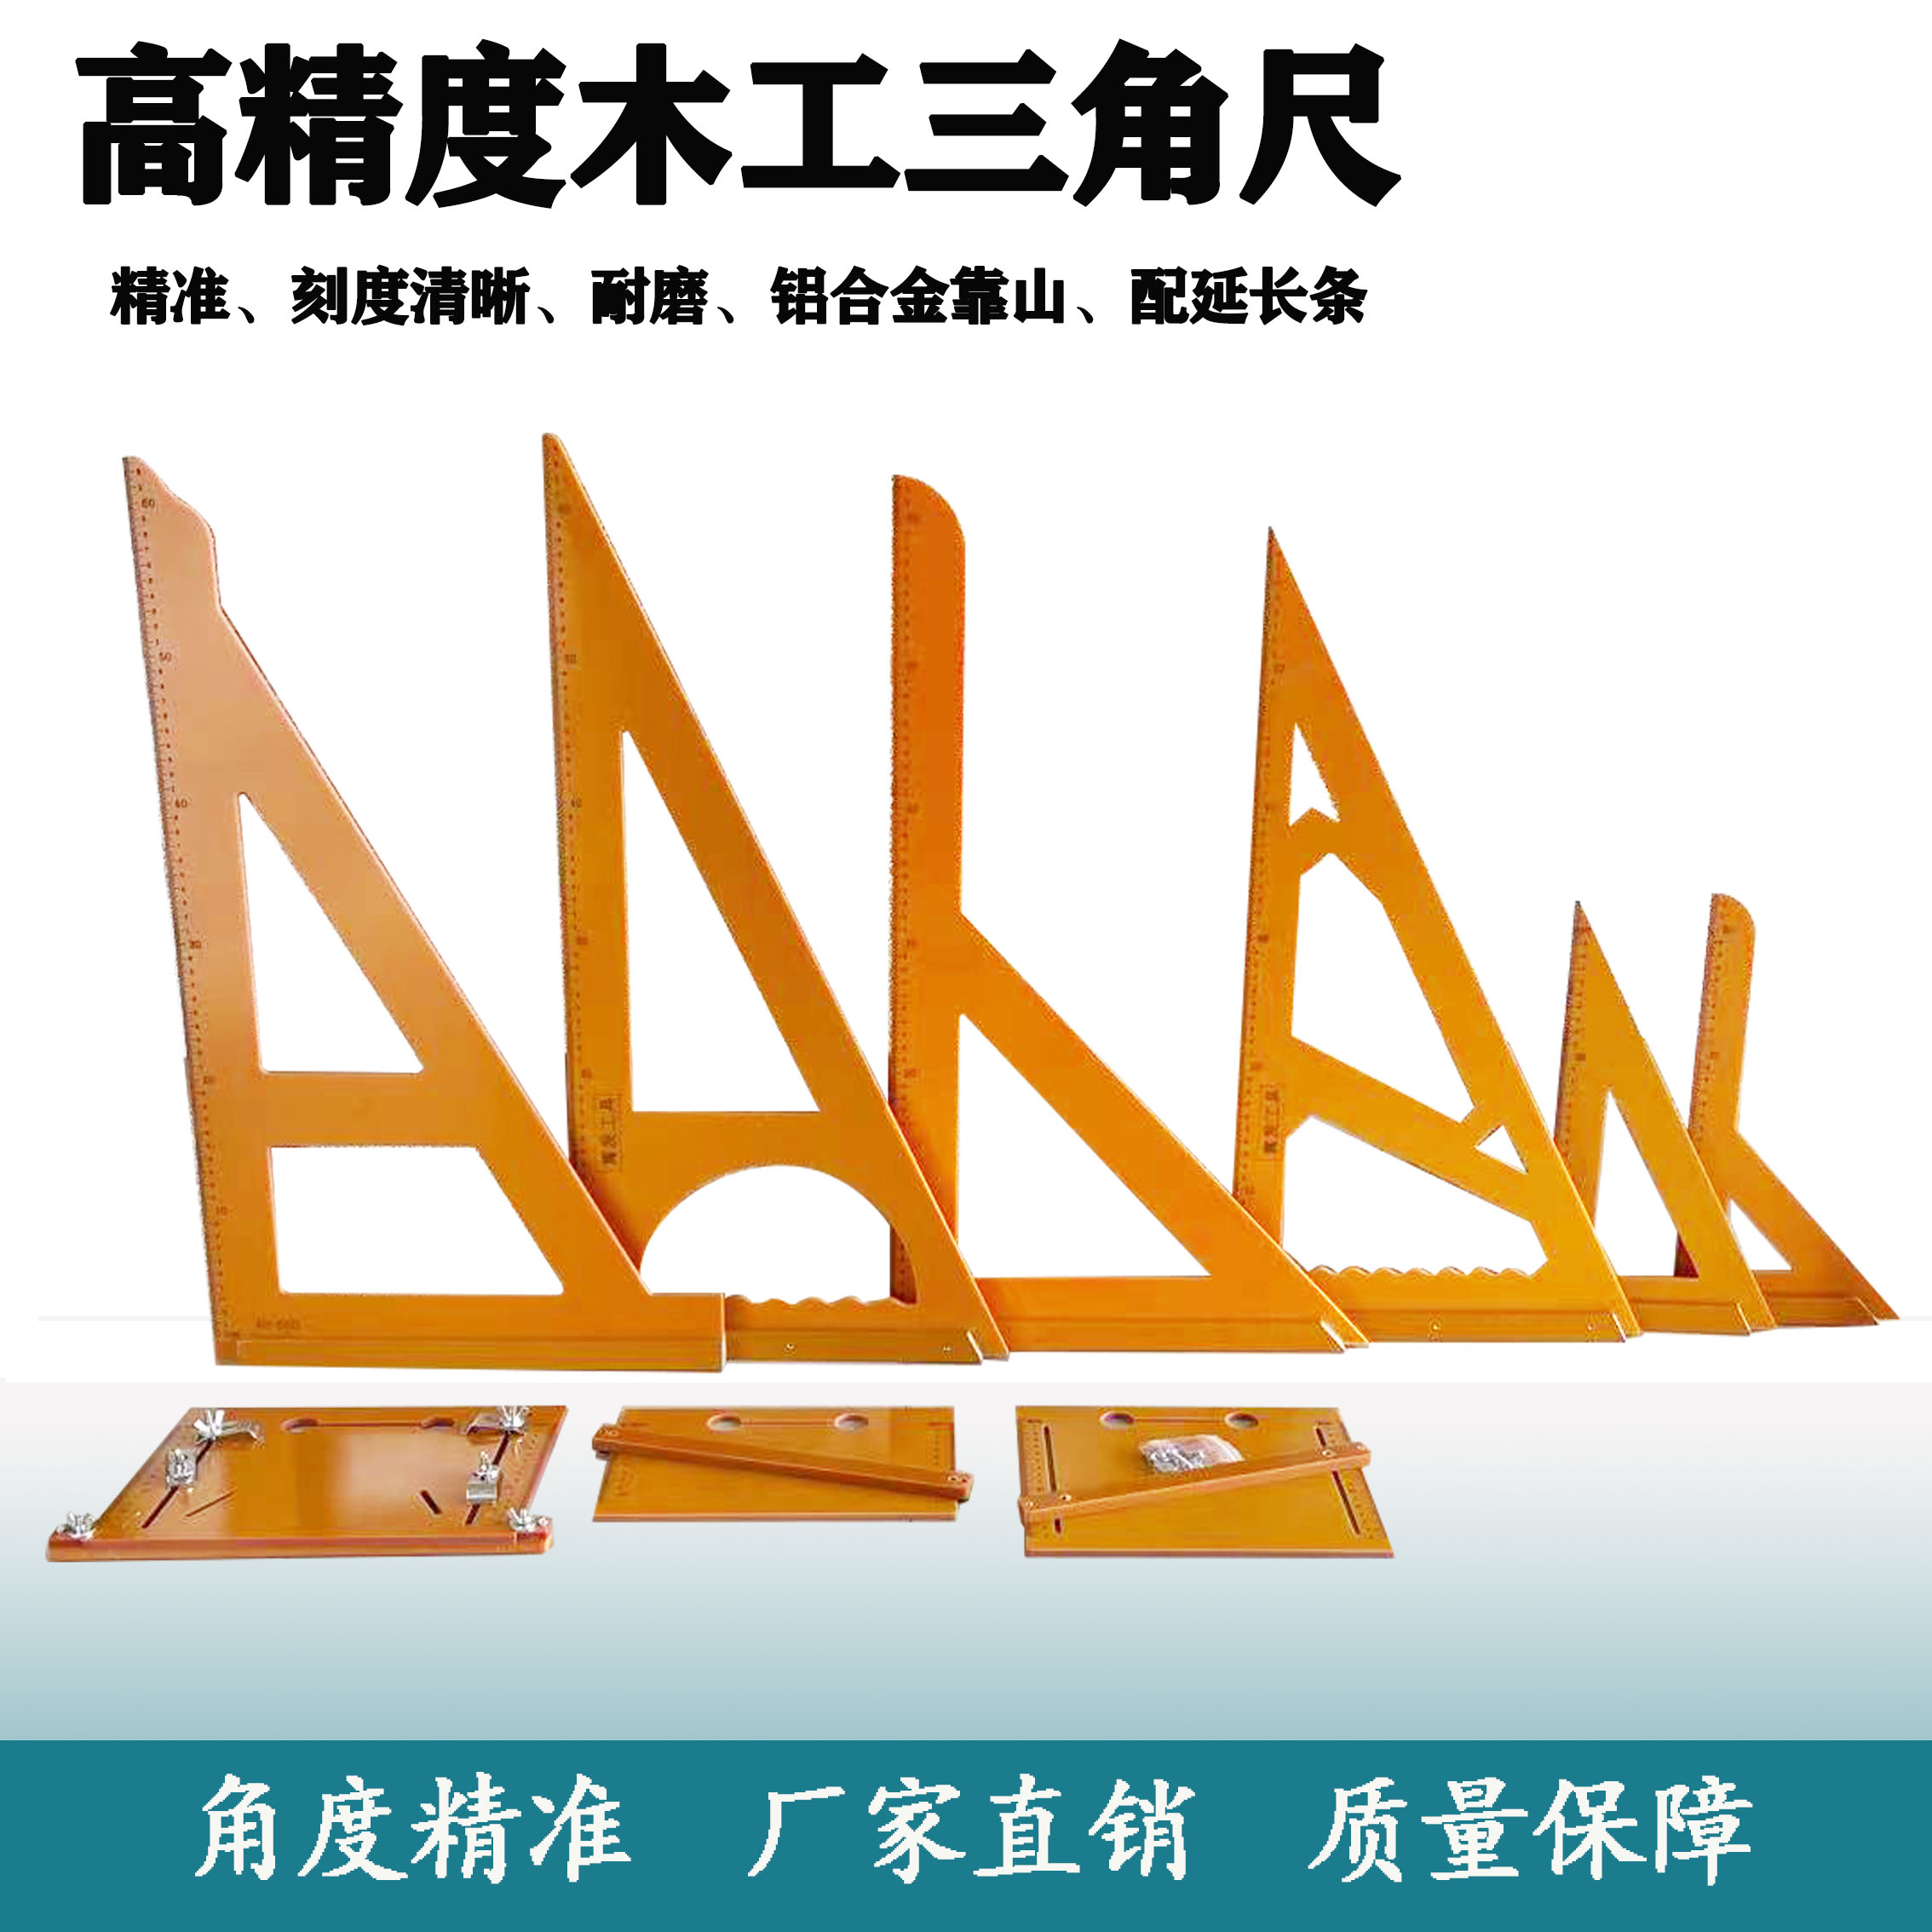 High precision carpentry triangle ruler Decoration turning ruler 90 degrees thickened large right angle ruler bakelite square ruler carpenter tool